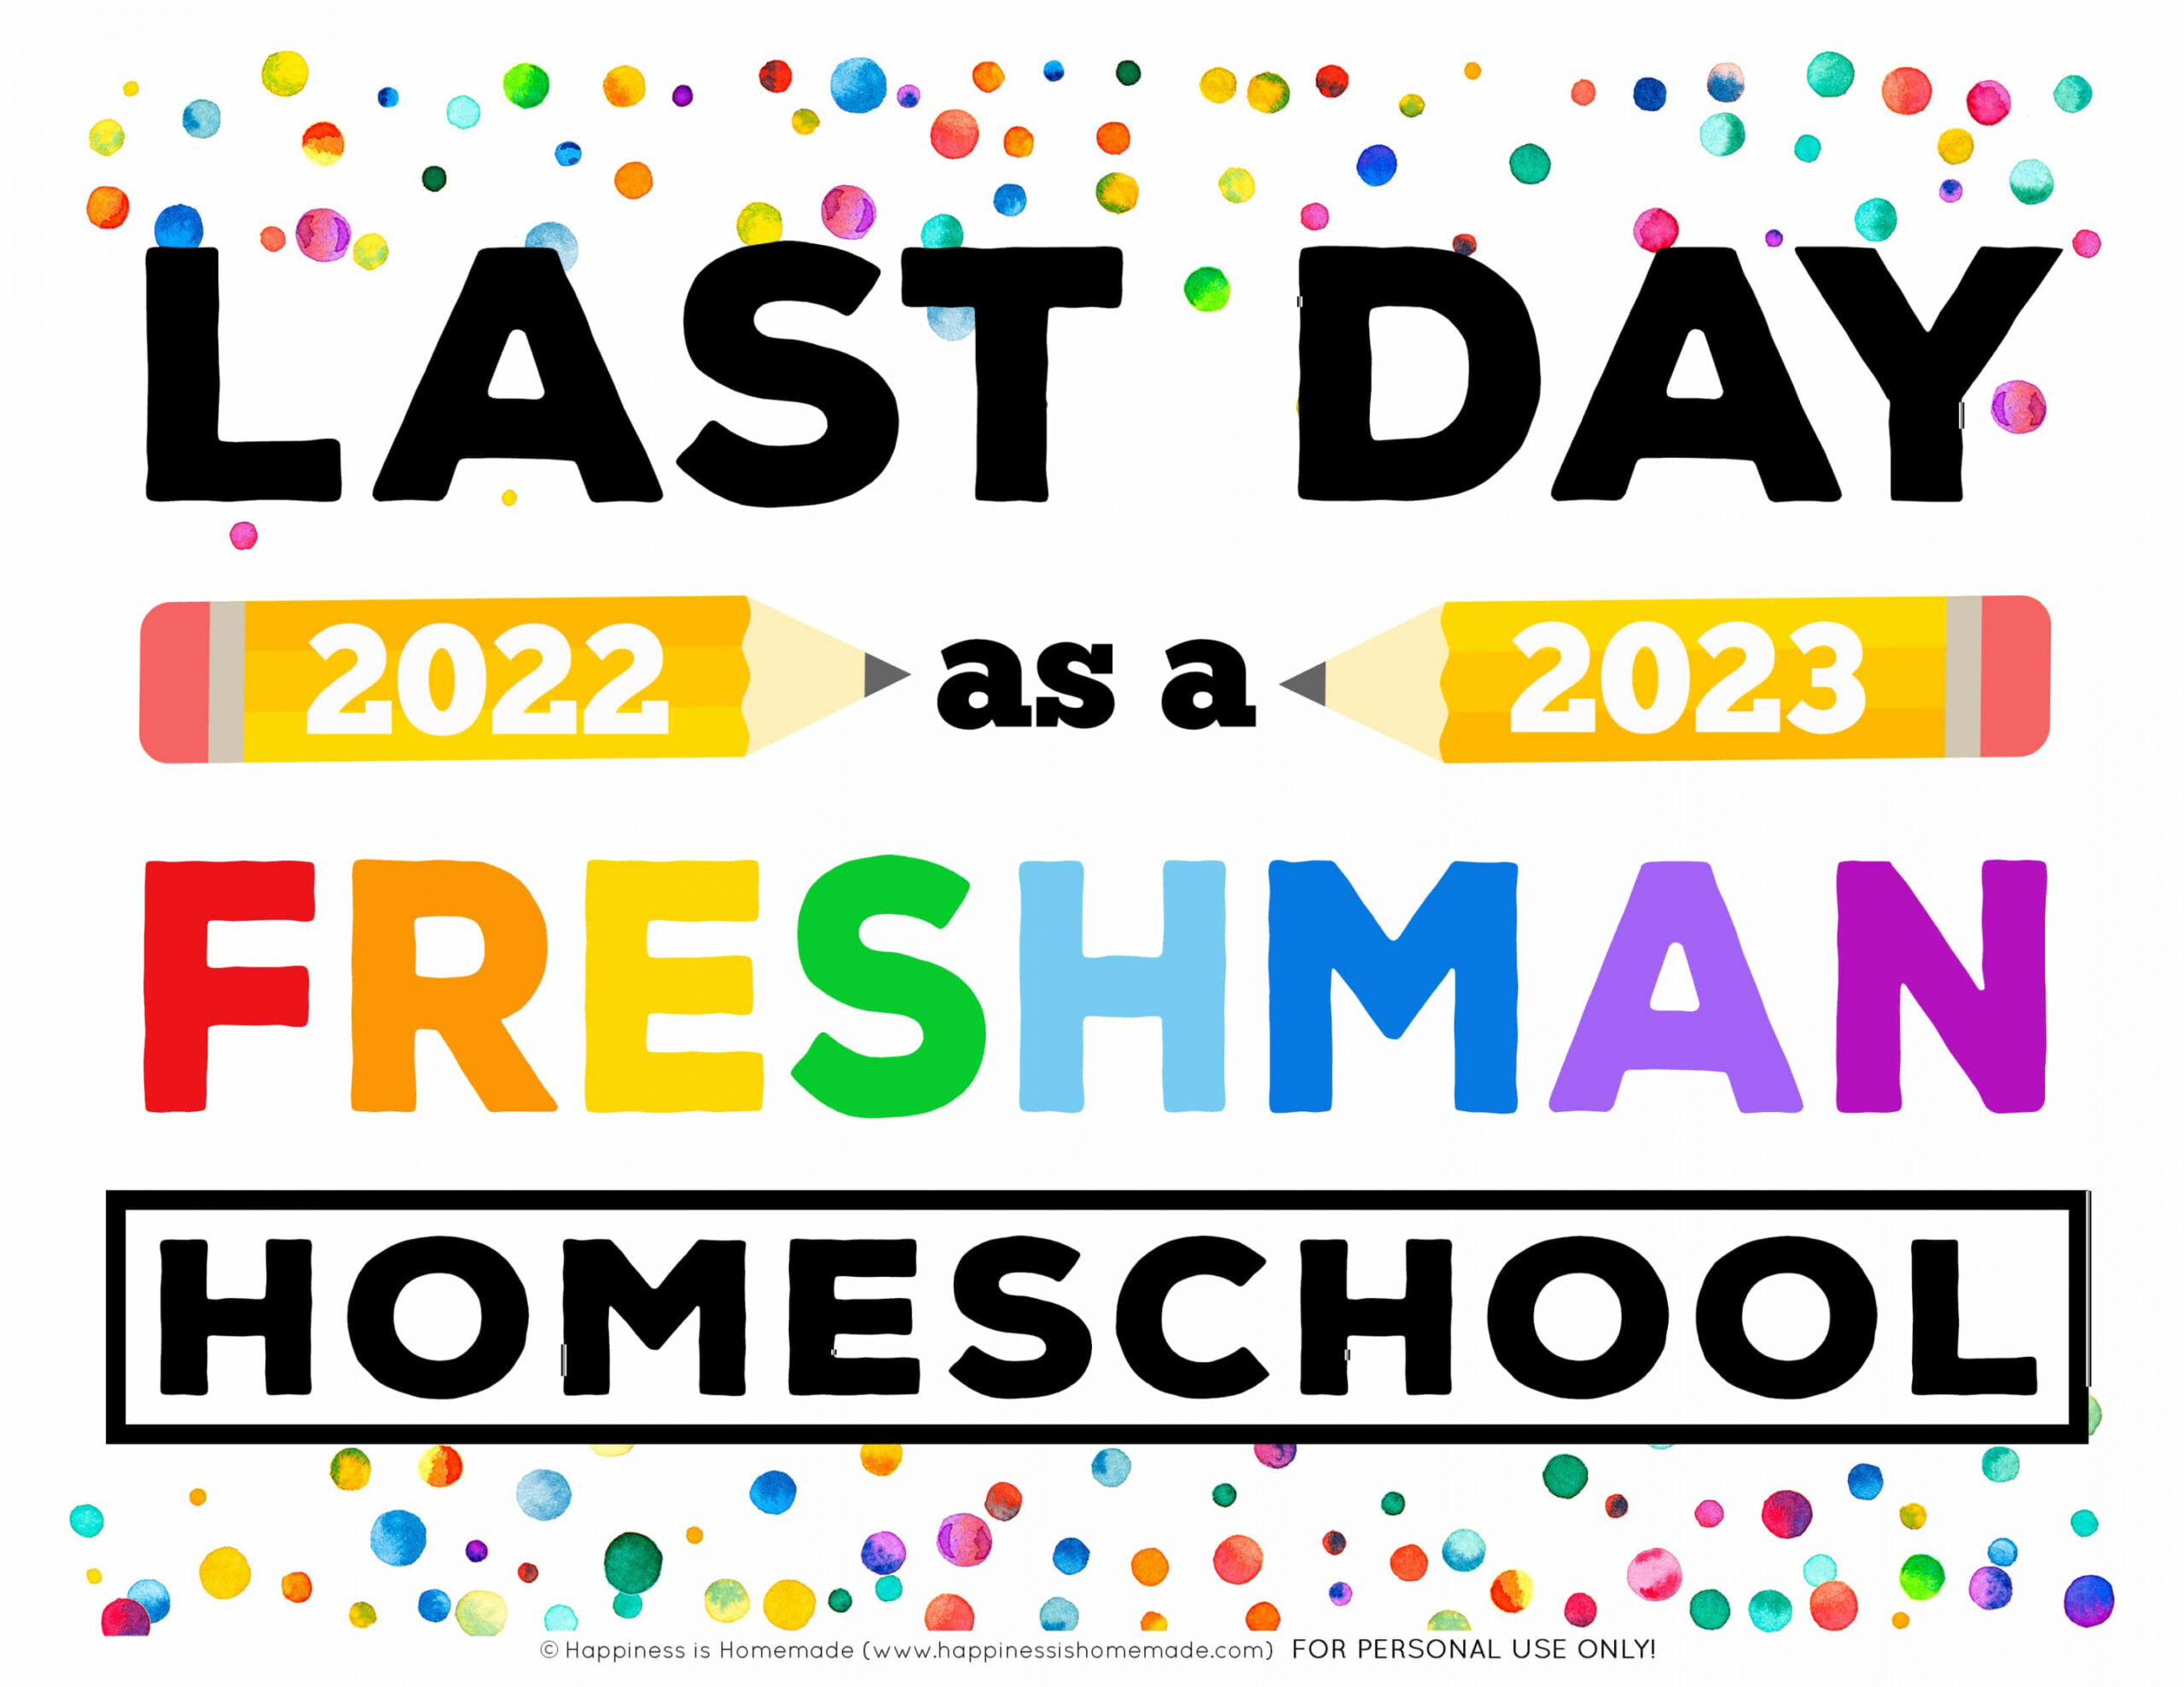 Last Day of School Signs Free Printable 2023 - Printable - Last Day of School Signs  - Free Printable - Happiness is Homemade